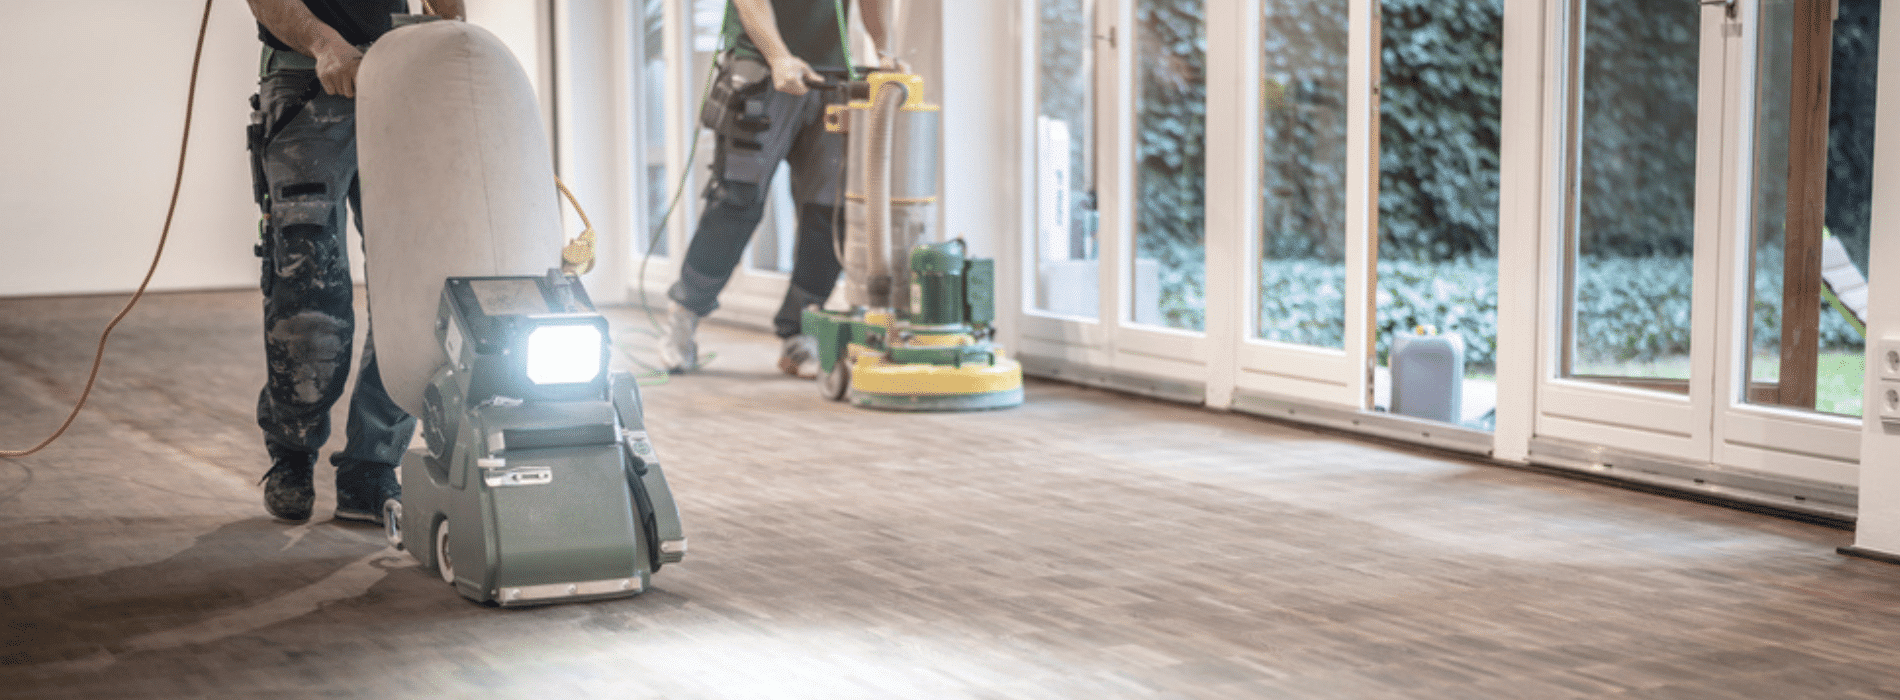 Wandsworth SW18 herringbone floor rejuvenated by Mr Sander® using 2.2 kW Bona belt sander; machine with HEPA-filtered dust extraction showcasing precision and clean finish.